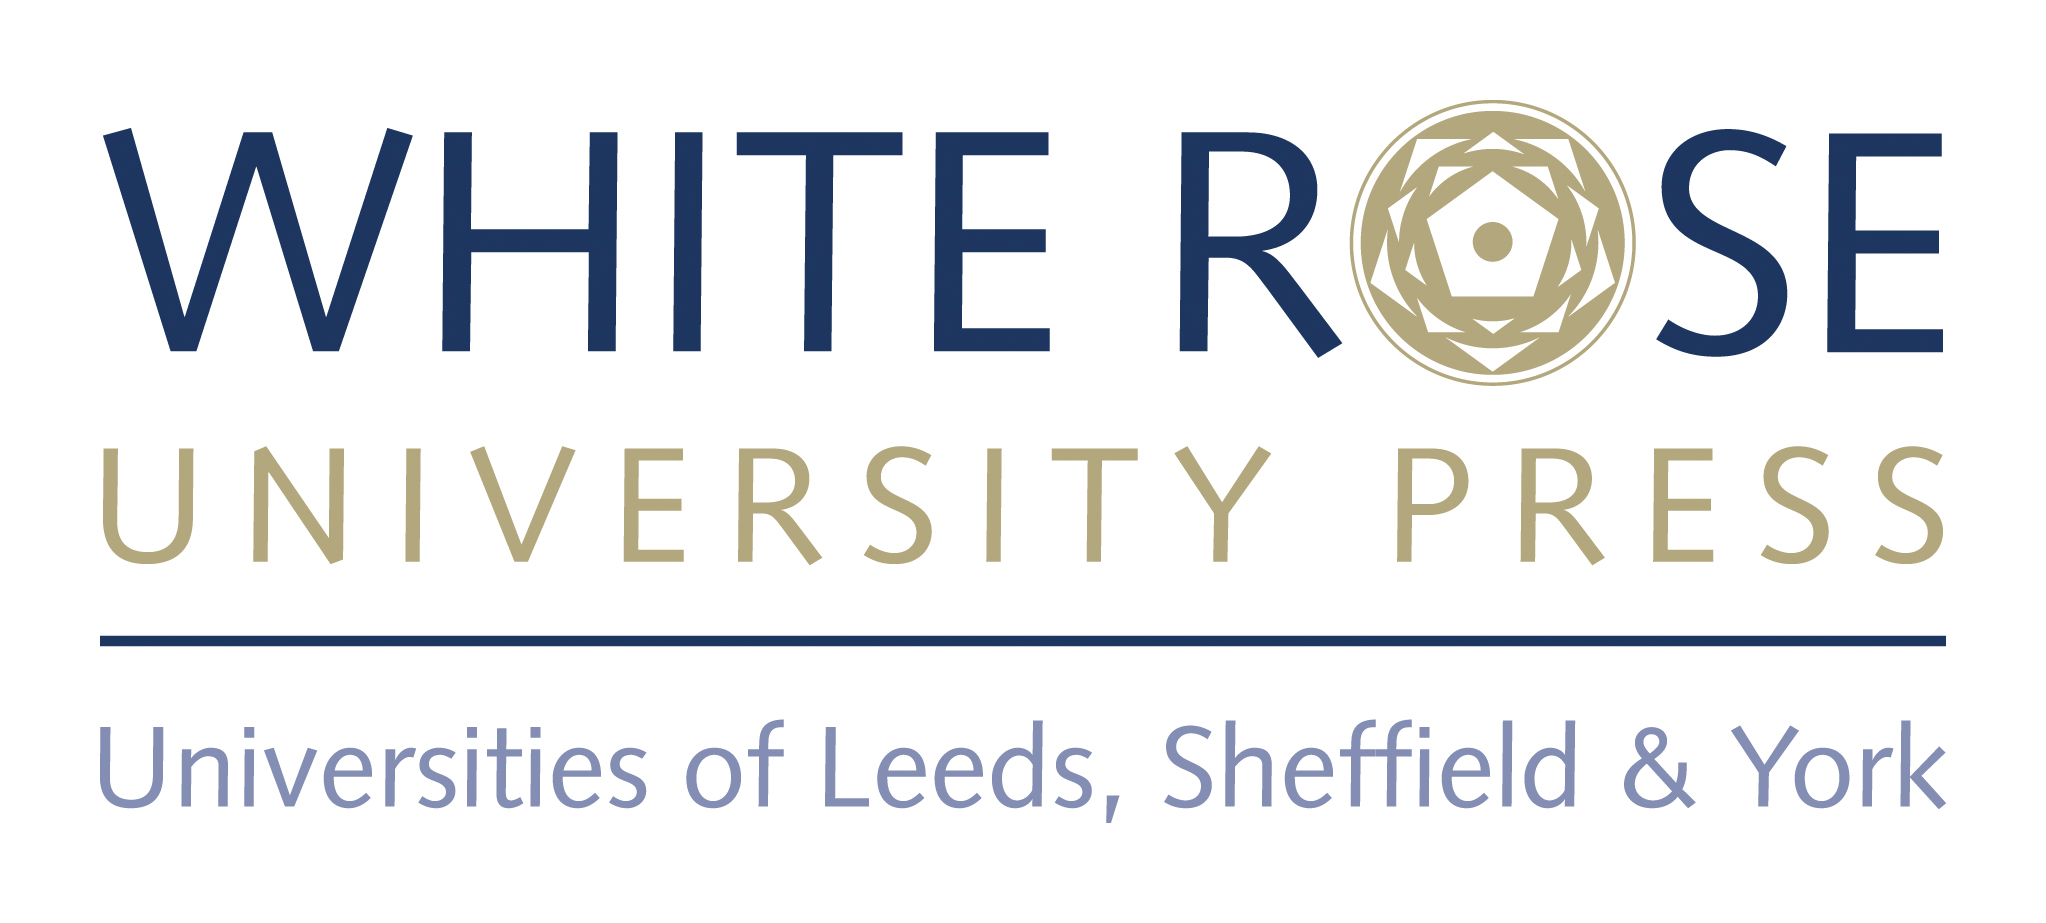 Logo for the White Rose University Press (WRUP), launched by the universities of Leeds, Sheffield, and York in January 2016.